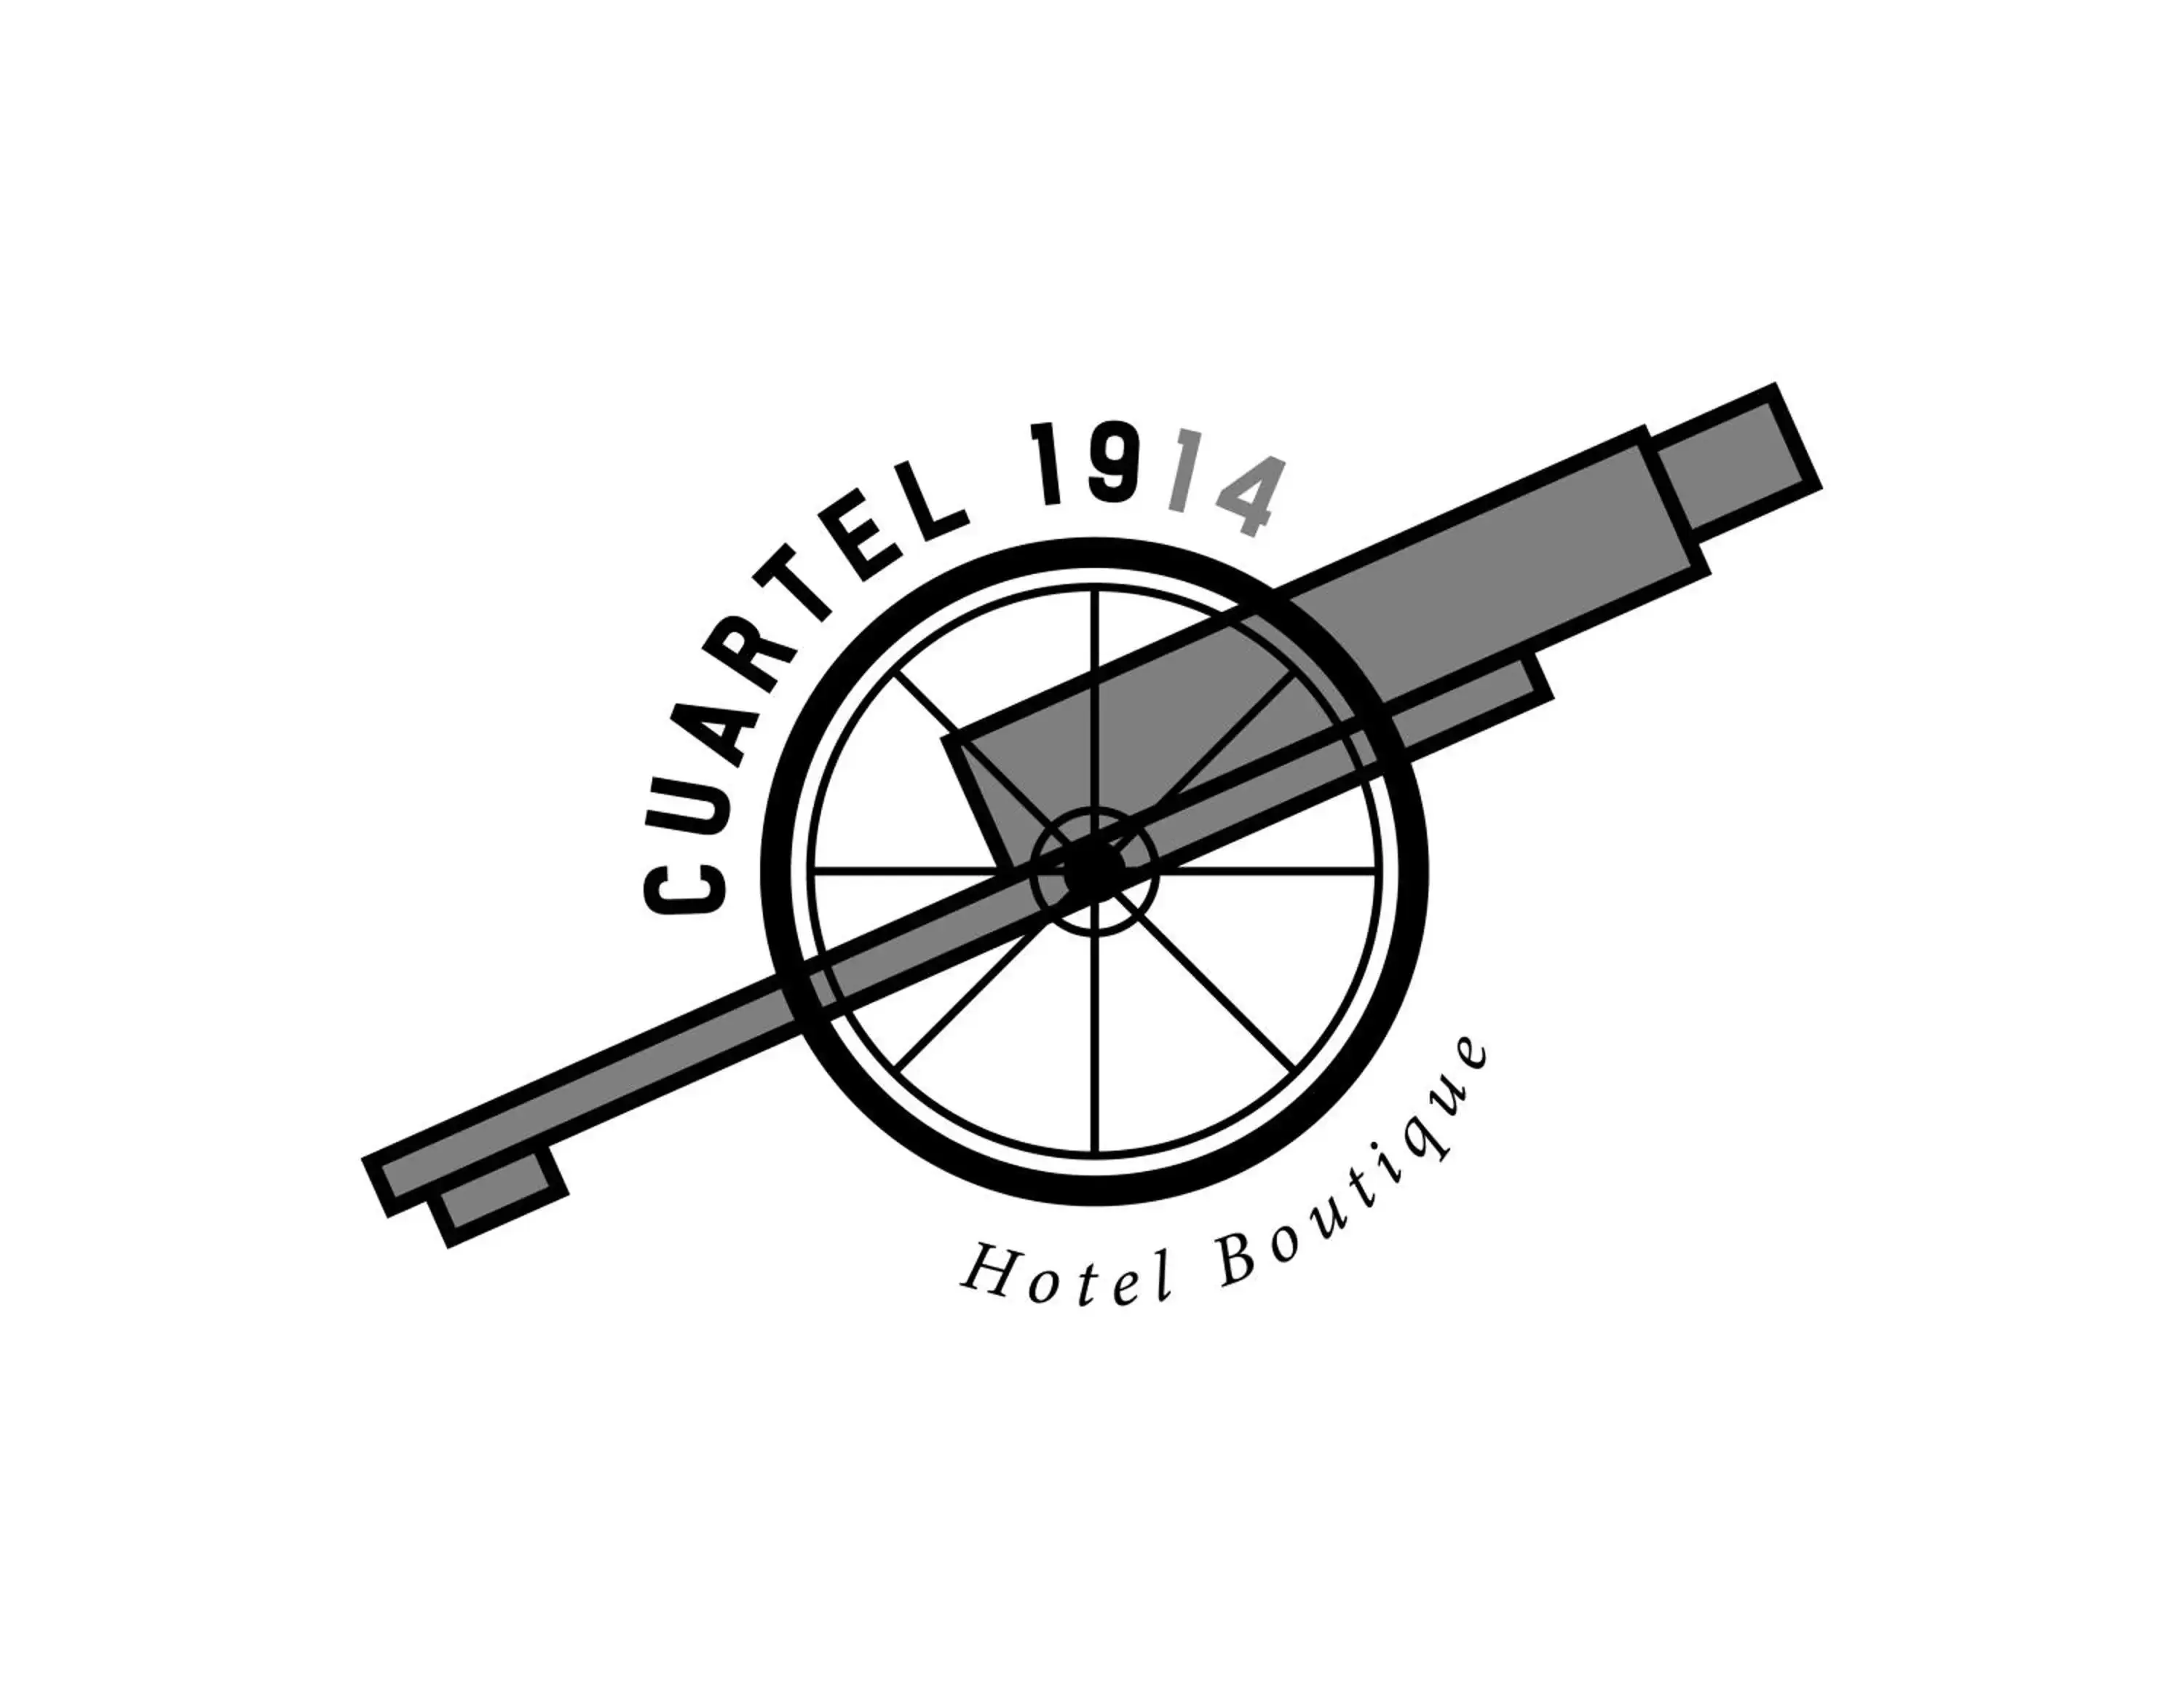 Property logo or sign in Cuartel 1914 - Hotel Boutique